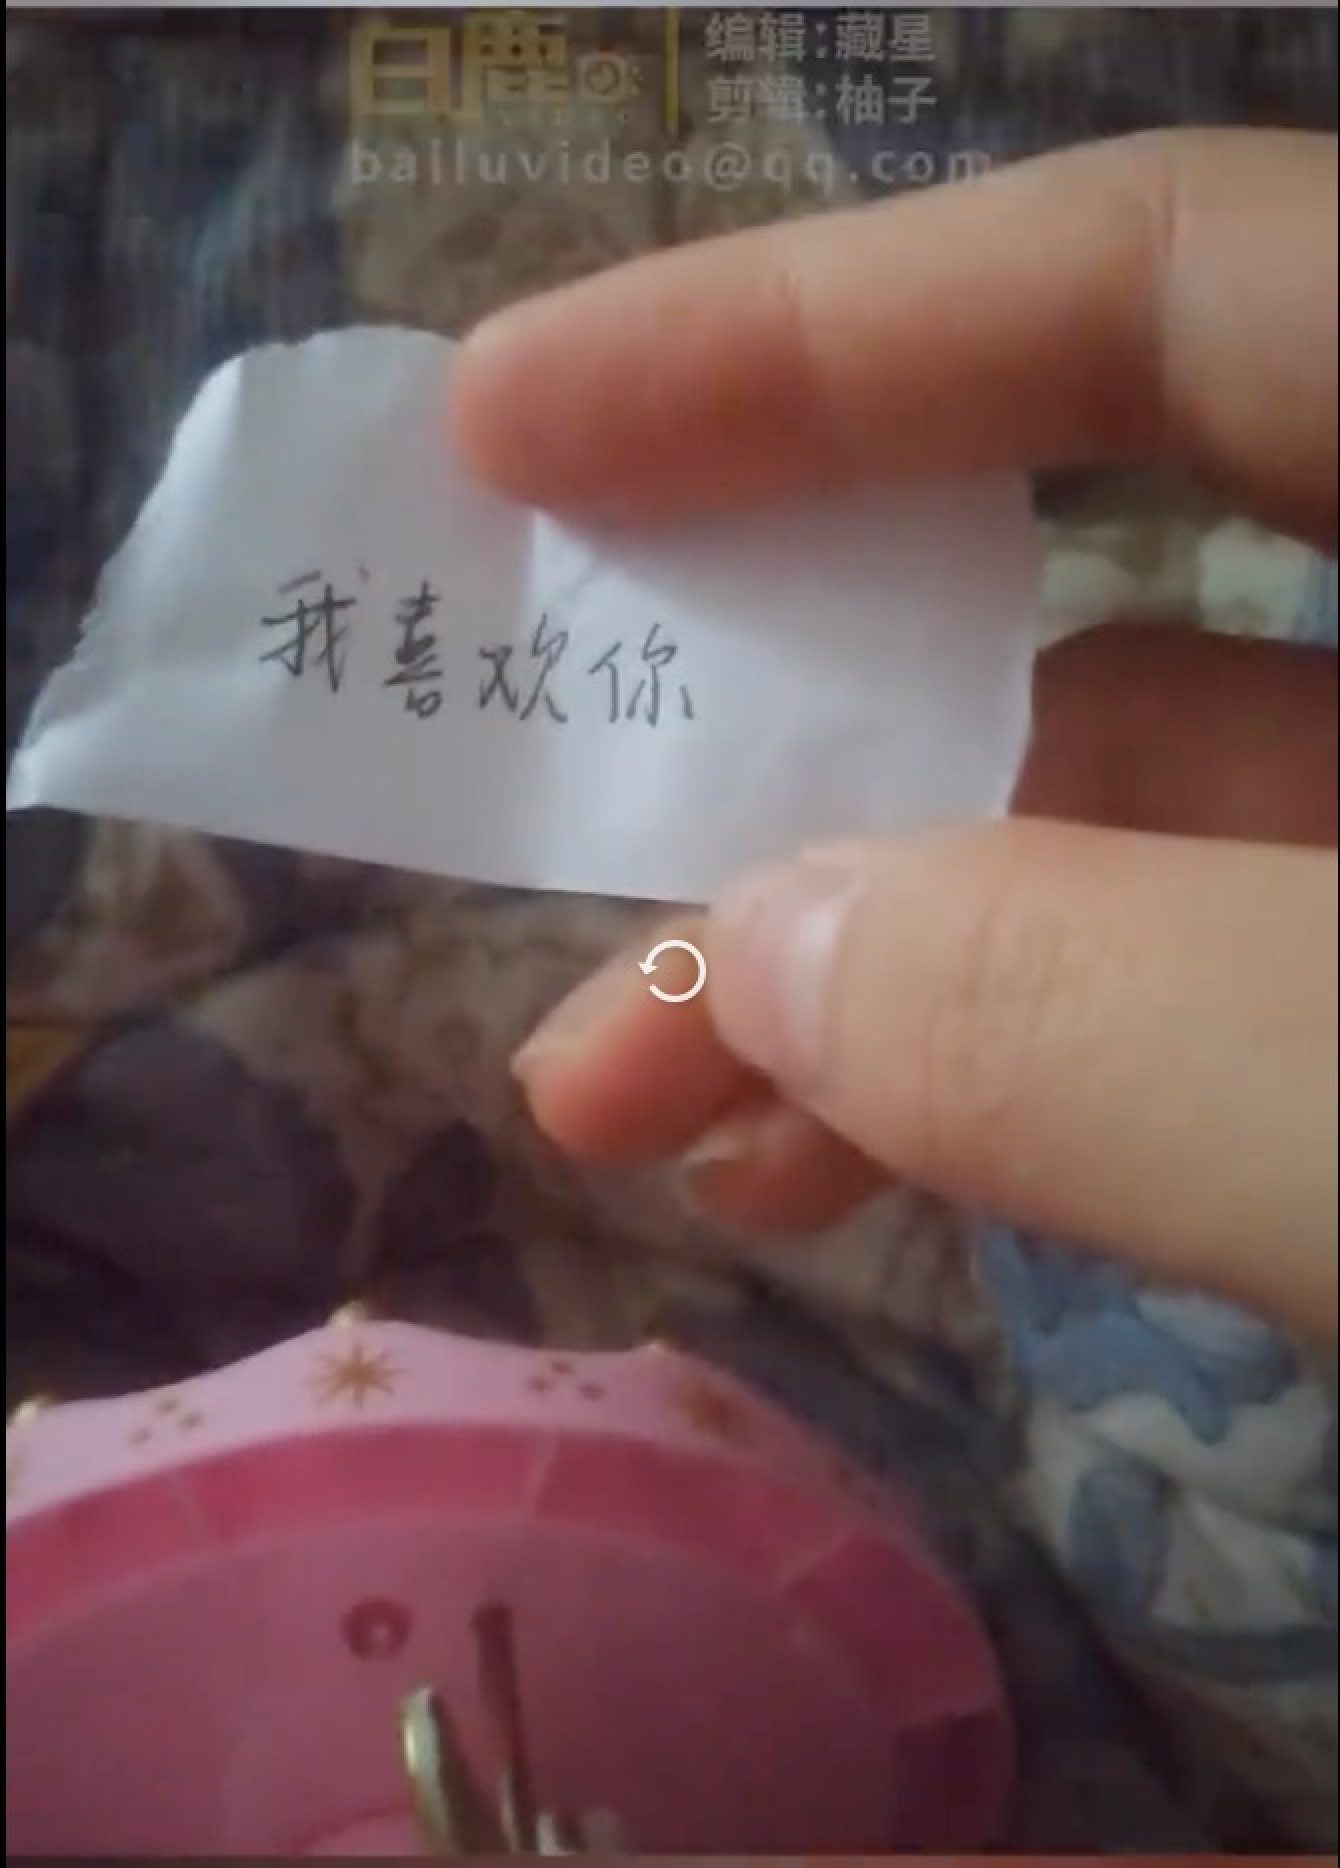 The note, hidden inside the battery compartment of the toy carousel, simply said, “I like you”. Photo: Weibo